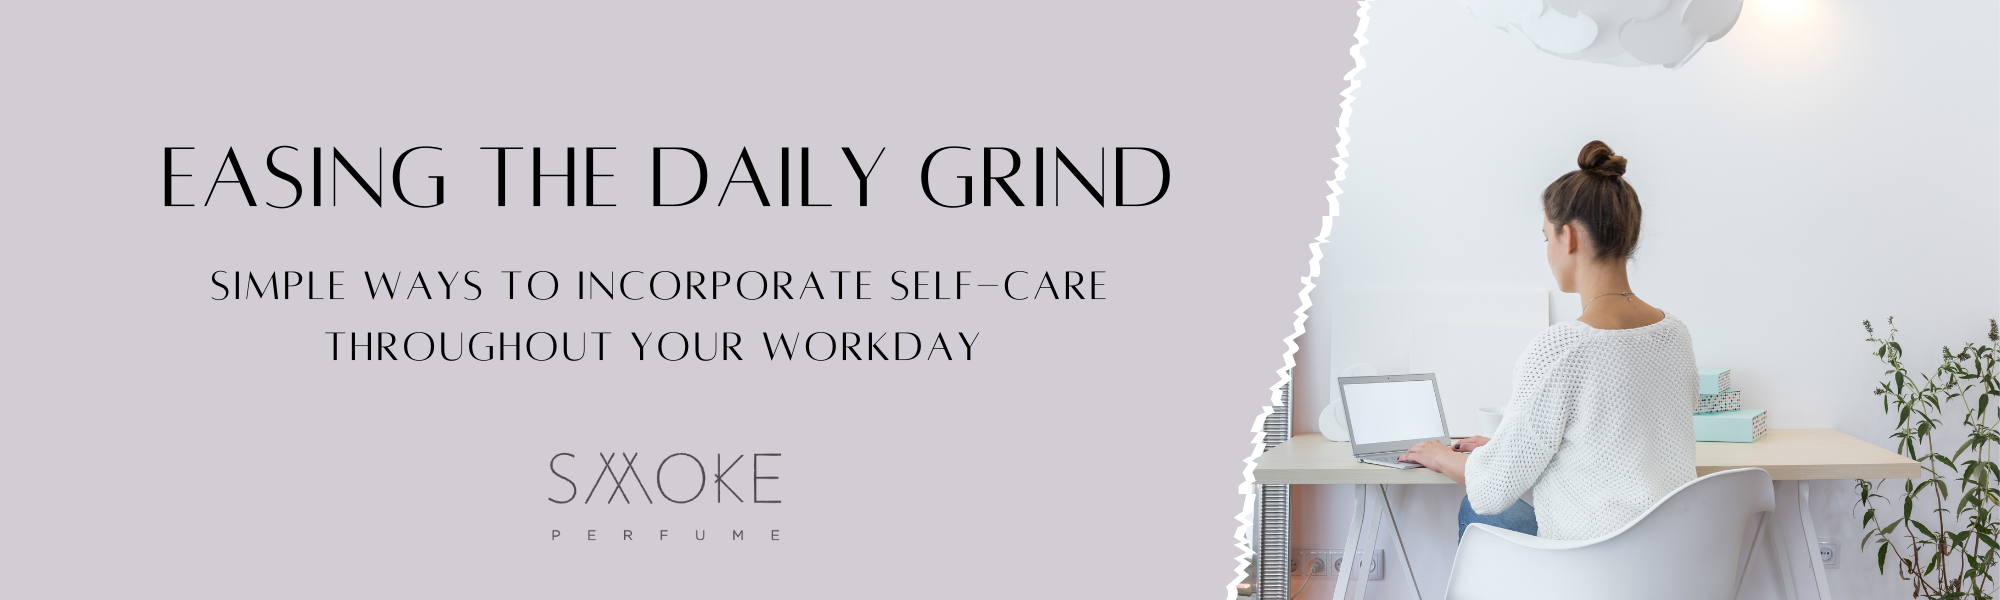 Easing the Daily Grind: Self-Care Throughout the Workday